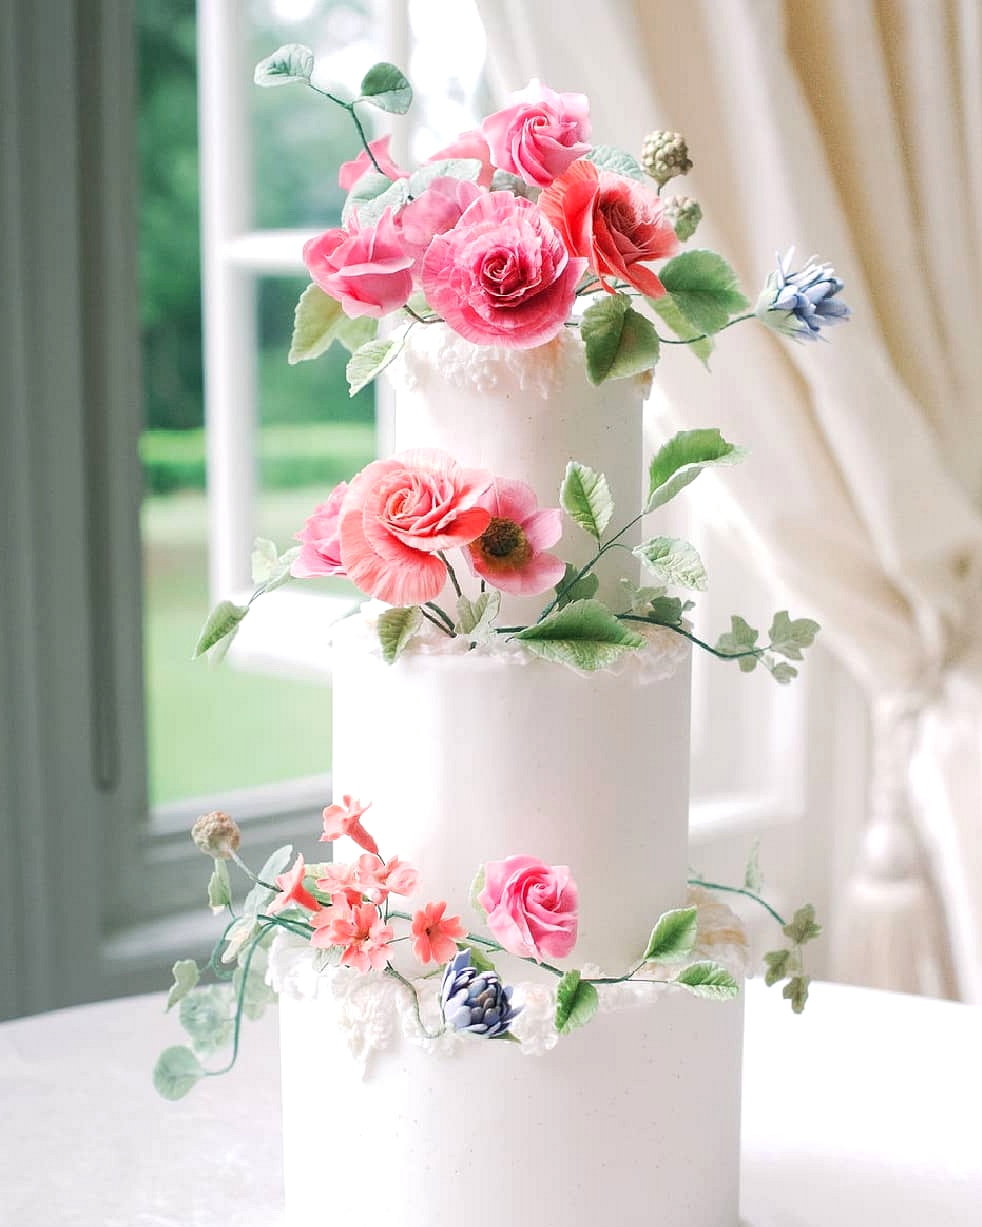 European wedding cake with sugar flowers and vine accents